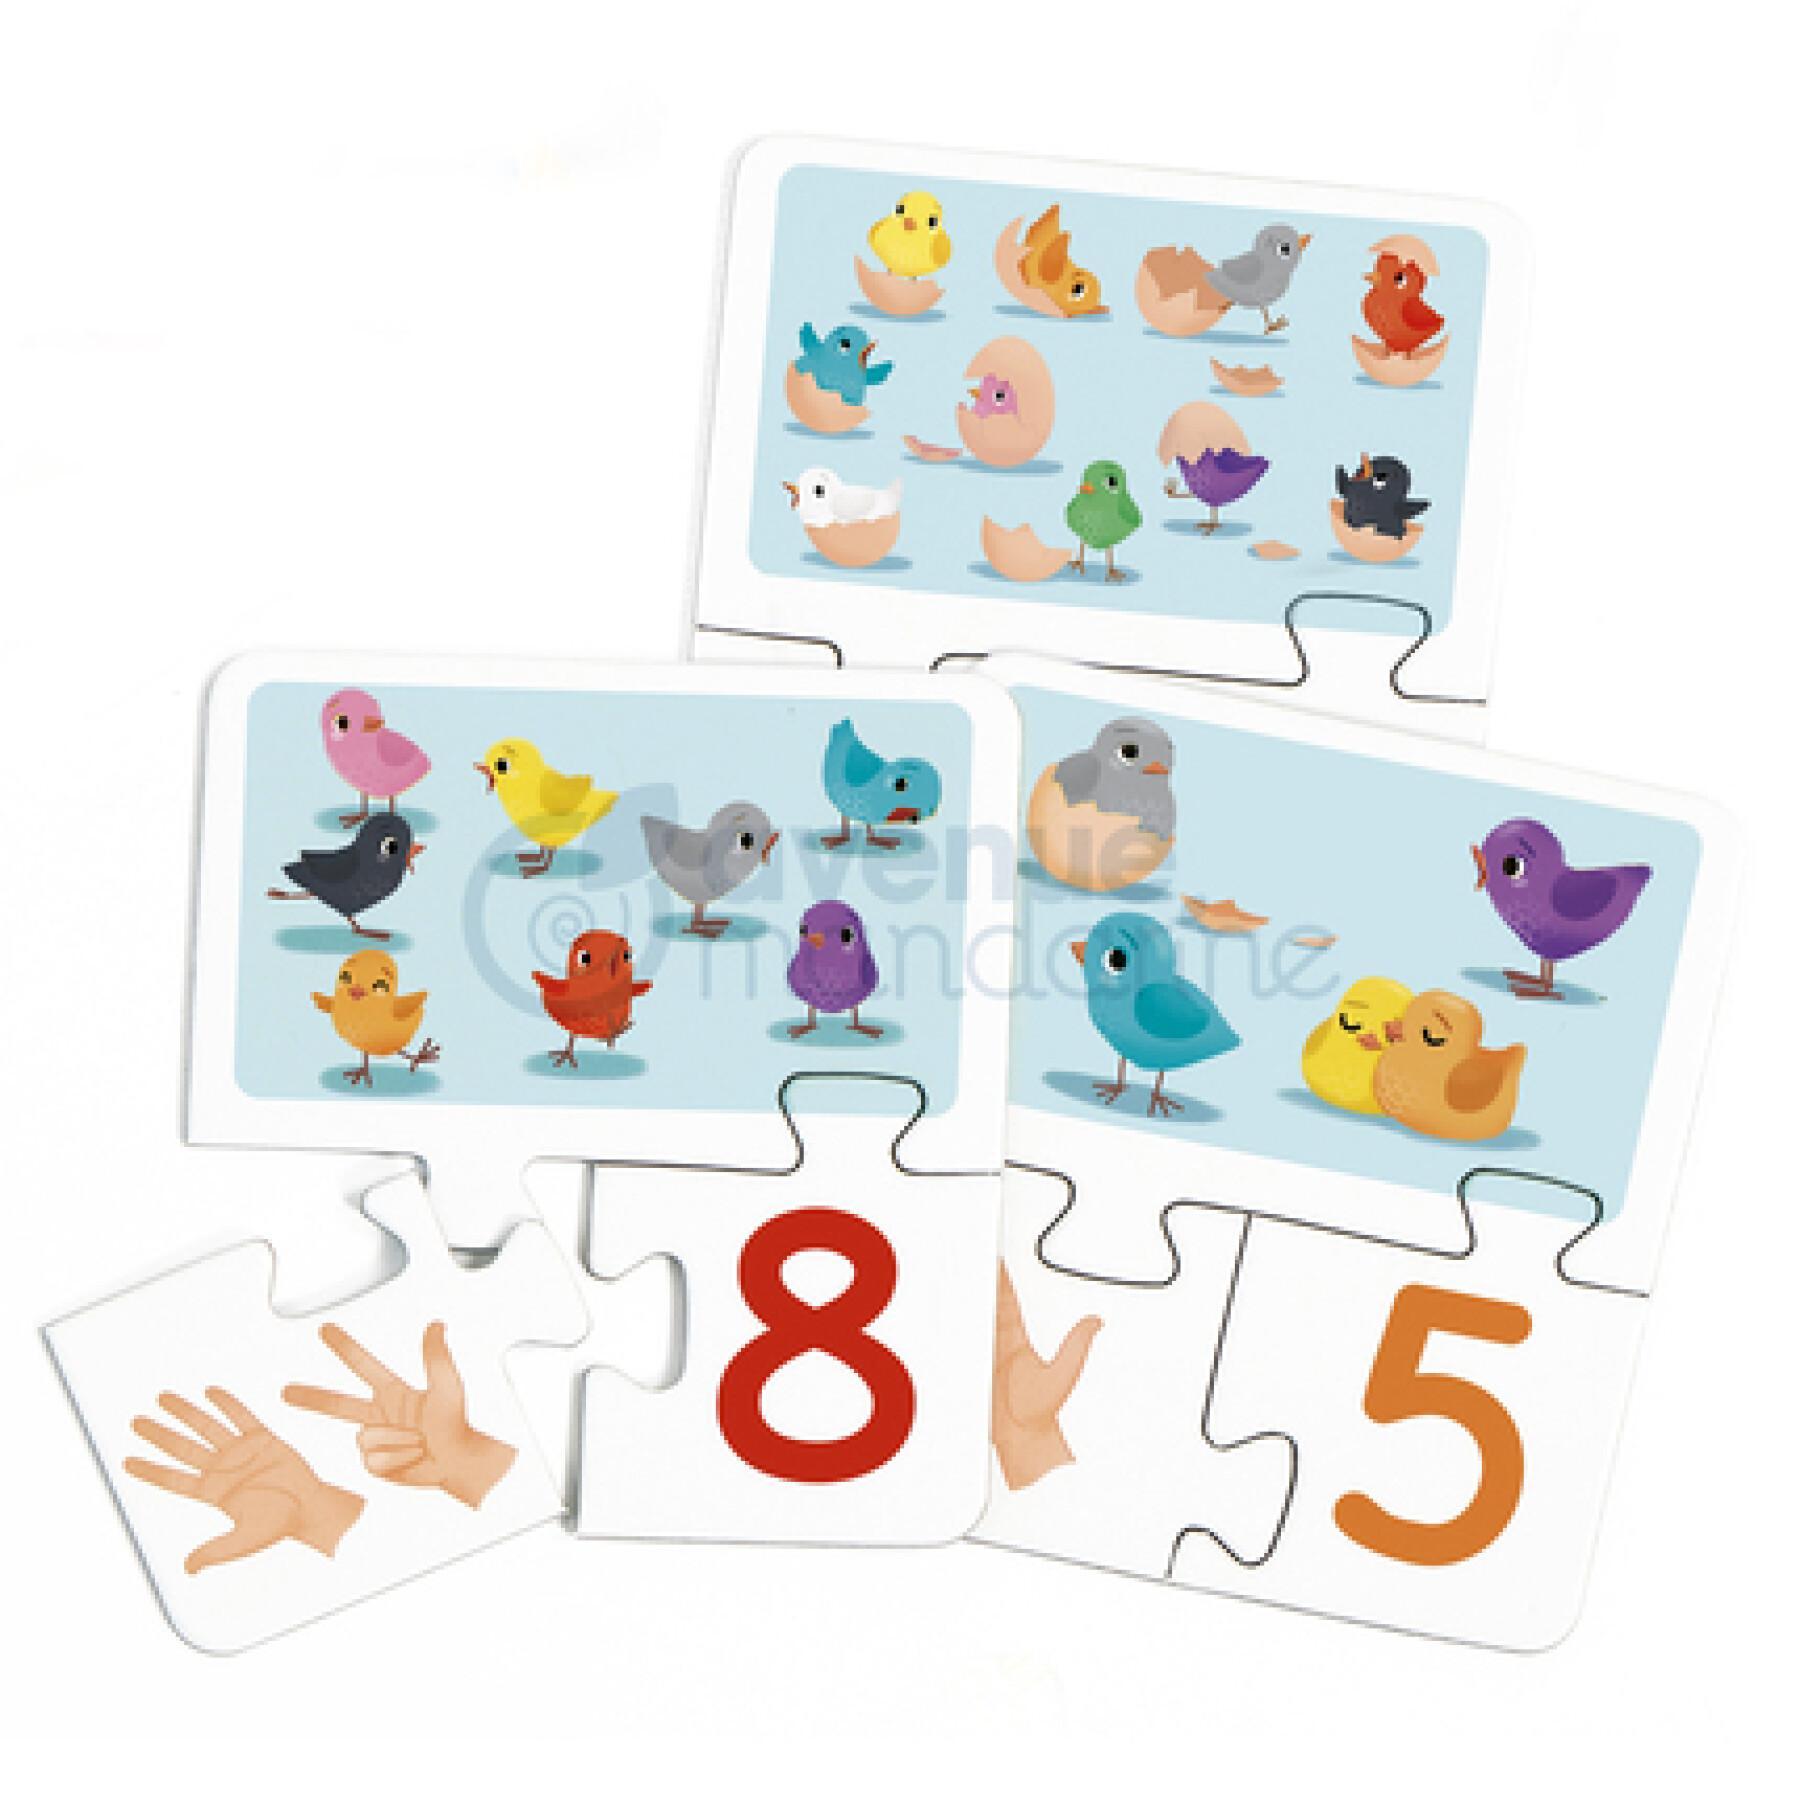 Educational games to learn to count Avenue Mandarine